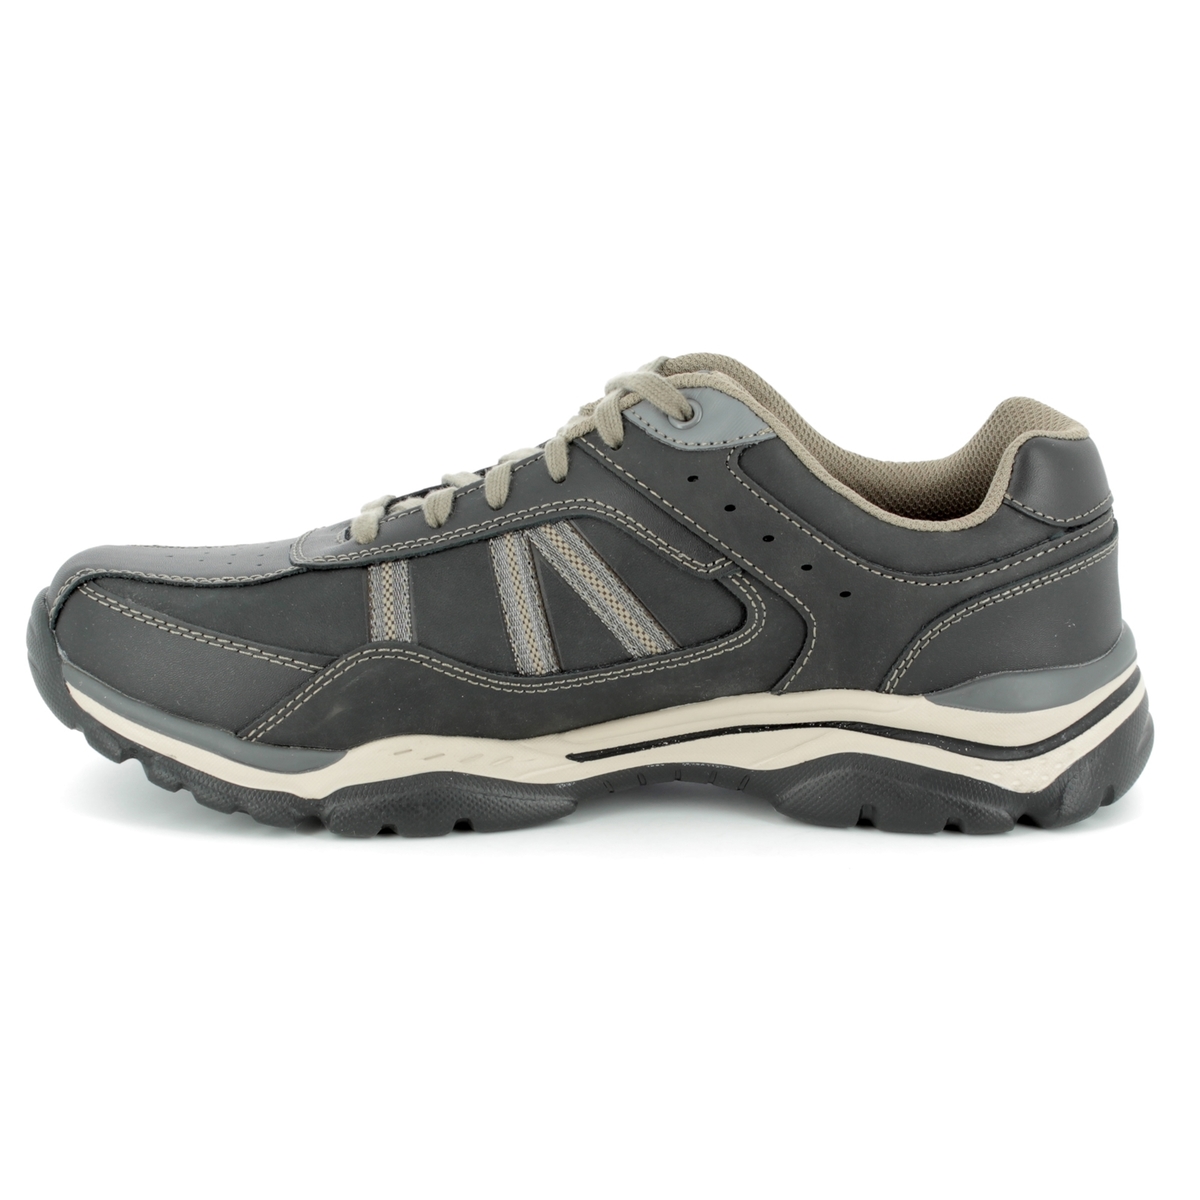 Skechers Rovato Texon Relaxed Fit 65418 BKTP black-taupe casual shoes